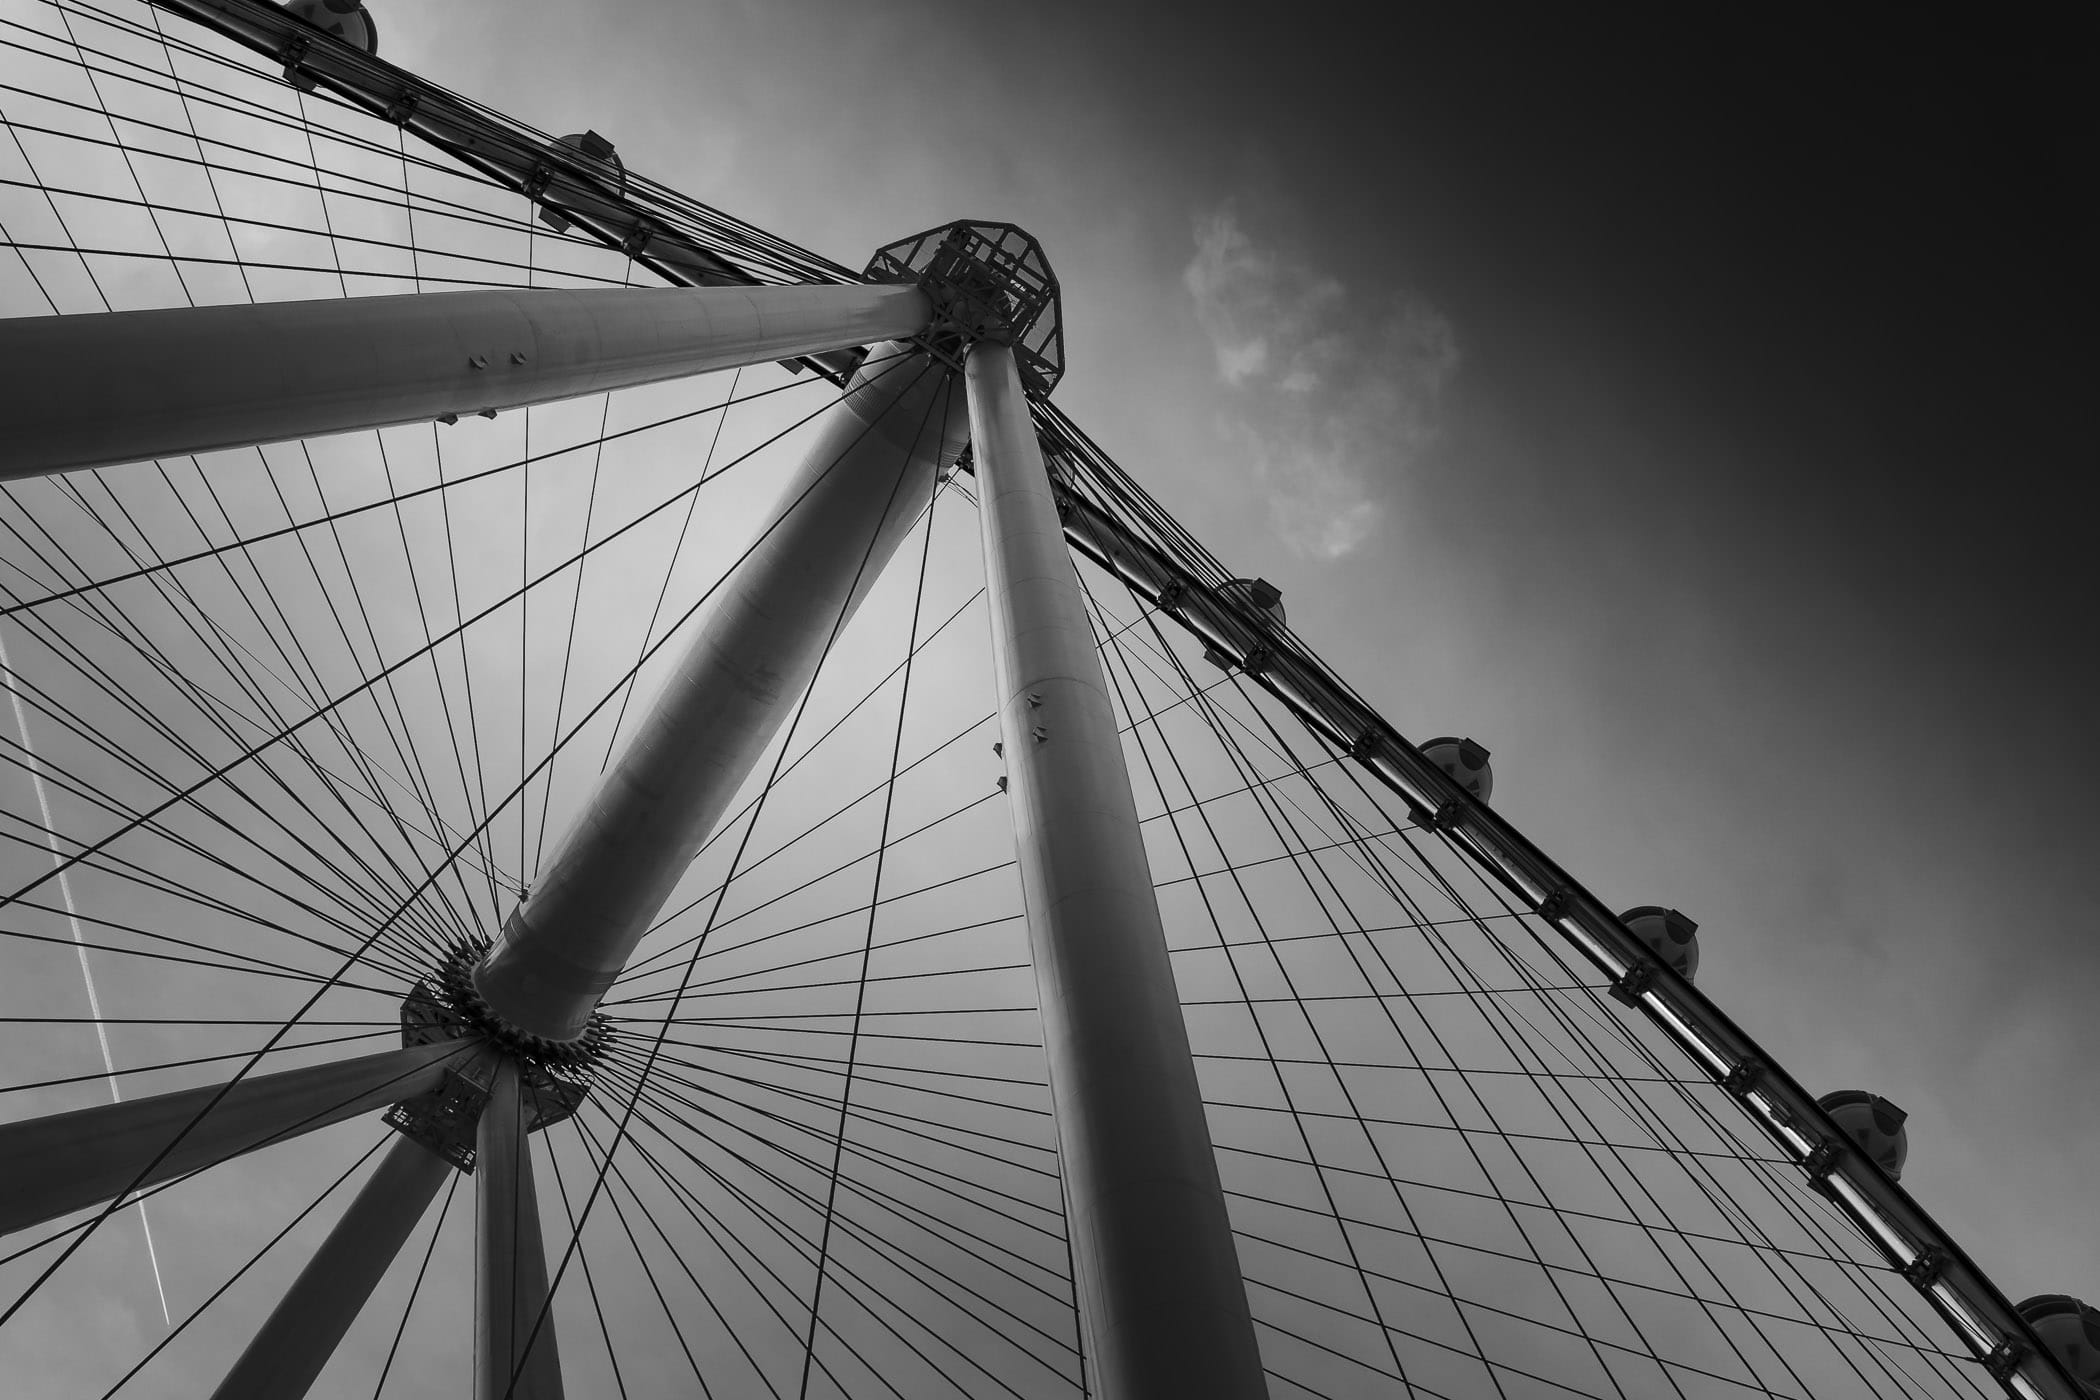 Detail of the support structure of Las Vegas' High Roller observation wheel.